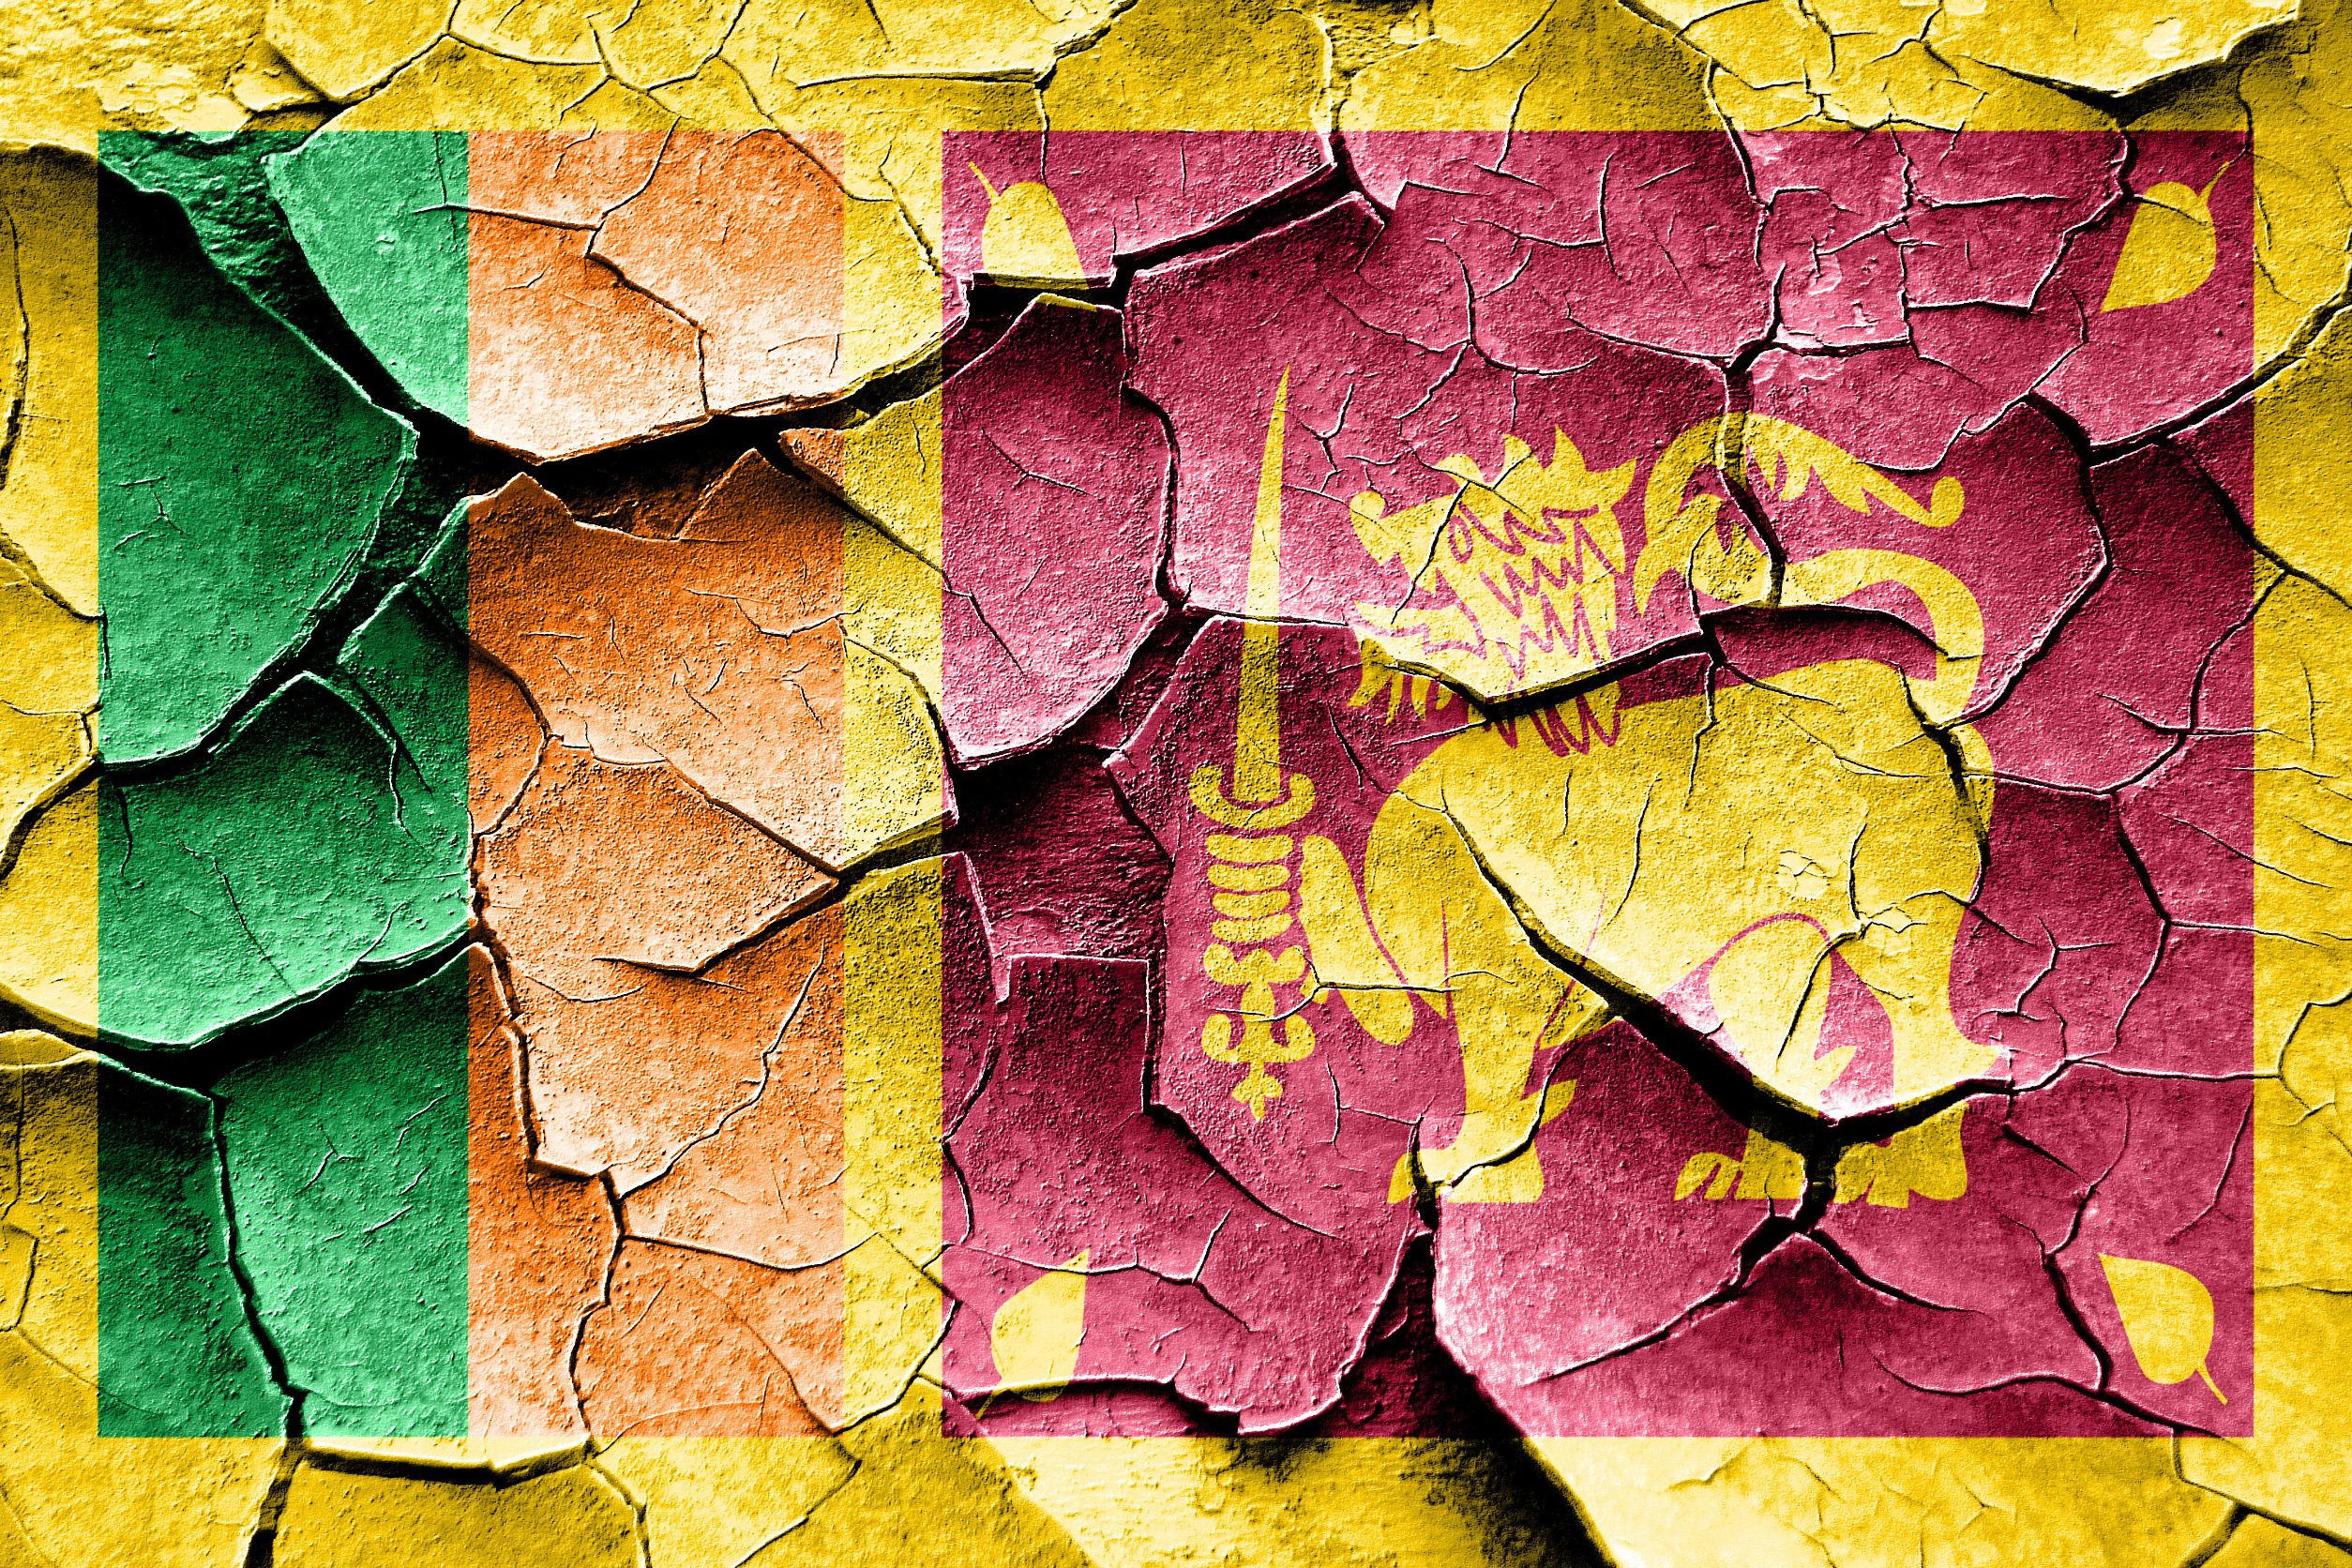 Sri Lanka’s Economic Crisis May Just Turn into a Battle for Influence